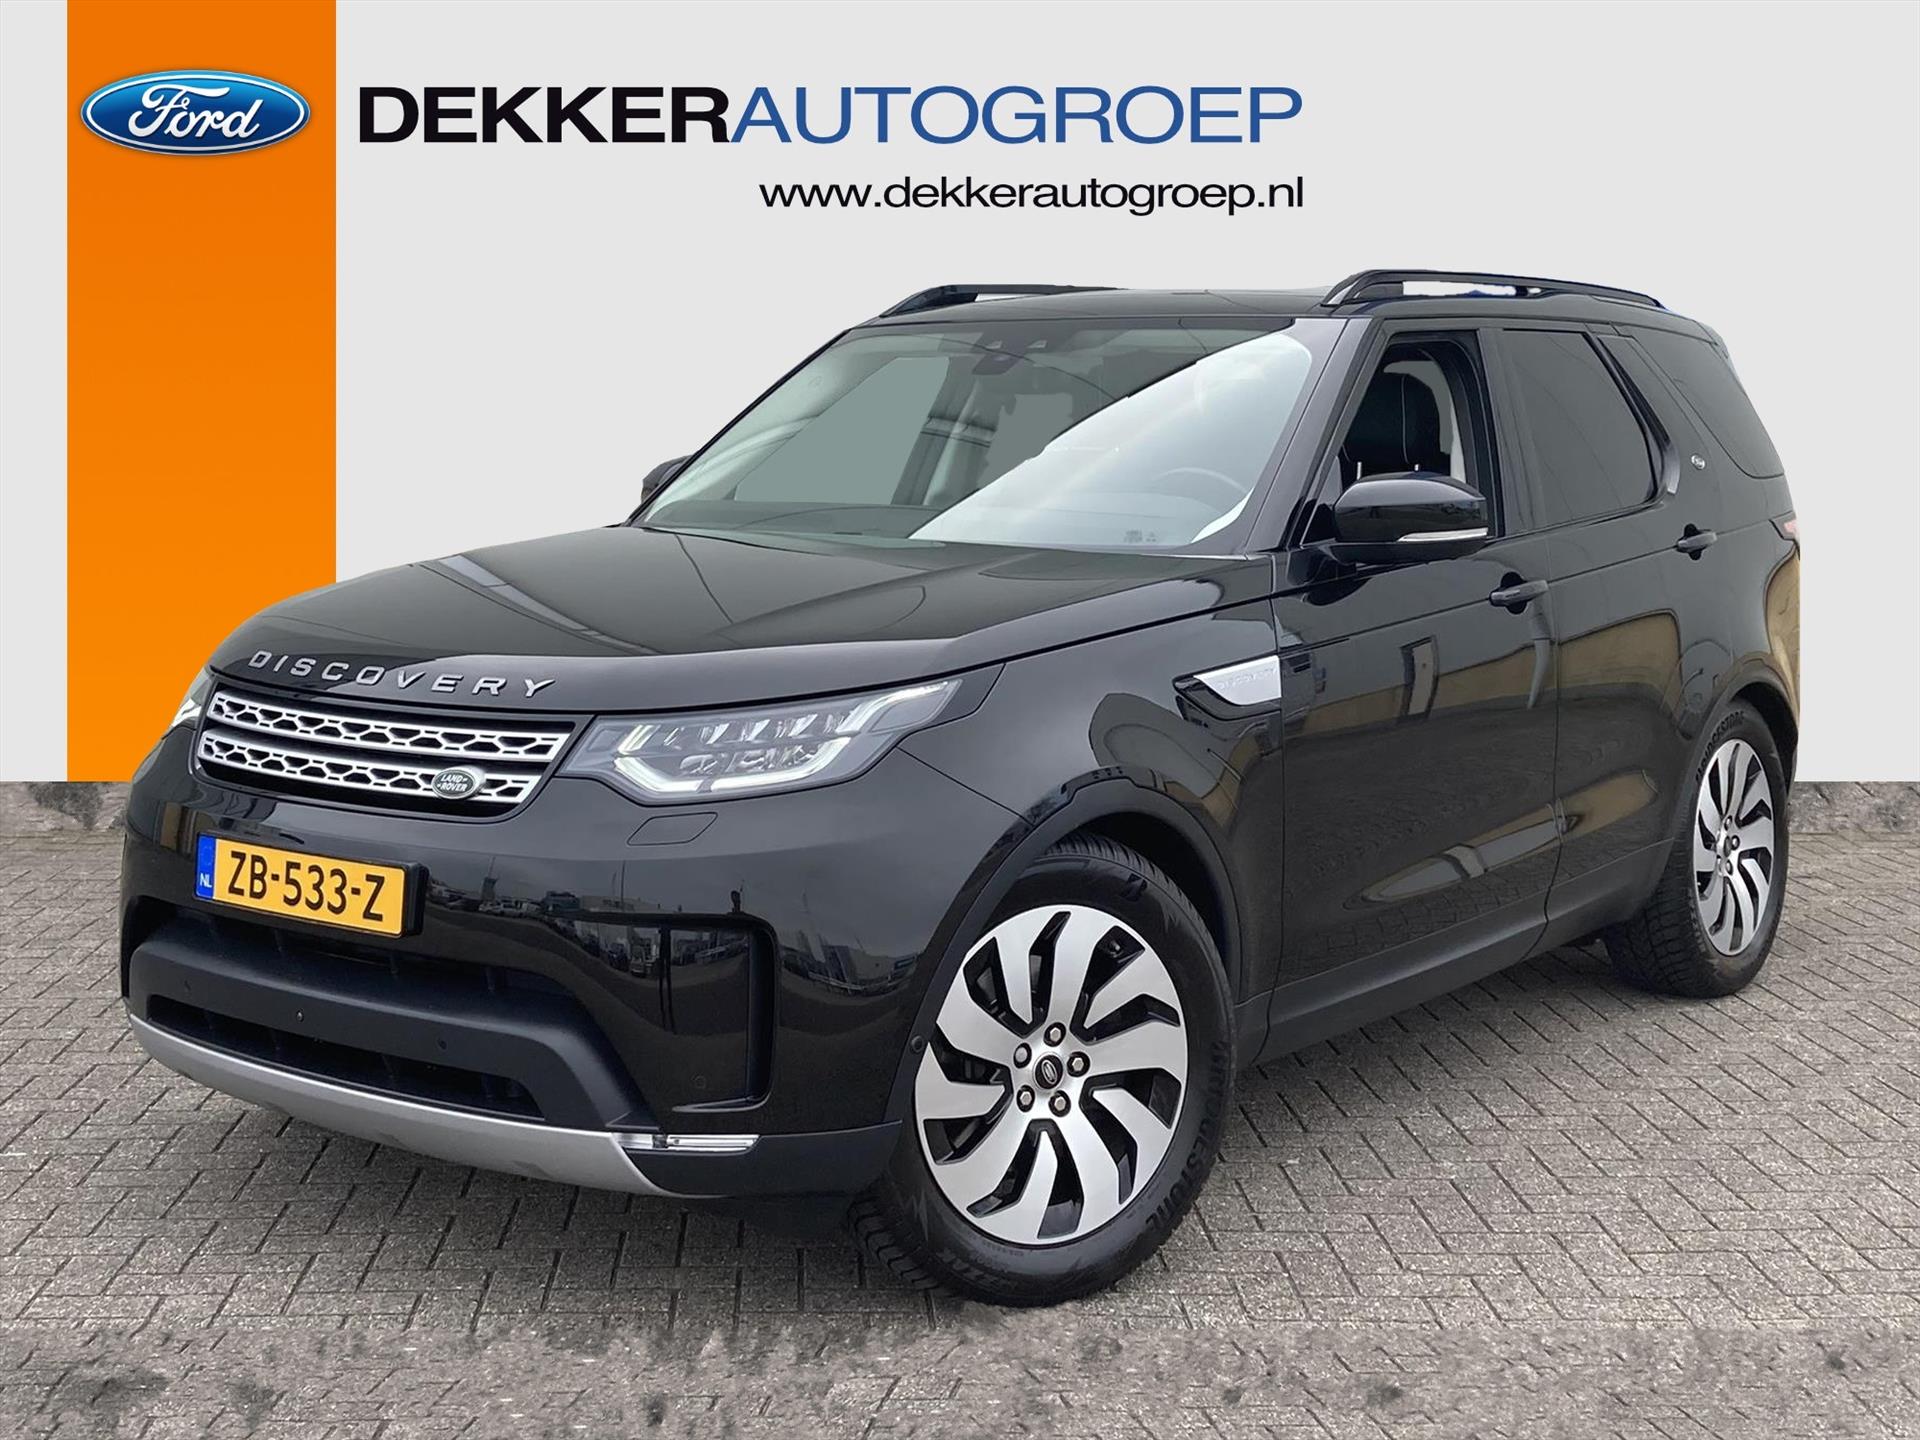 Land Rover Discovery 2.0 SD4 240 pk HSE automaat 7-zits bij viaBOVAG.nl